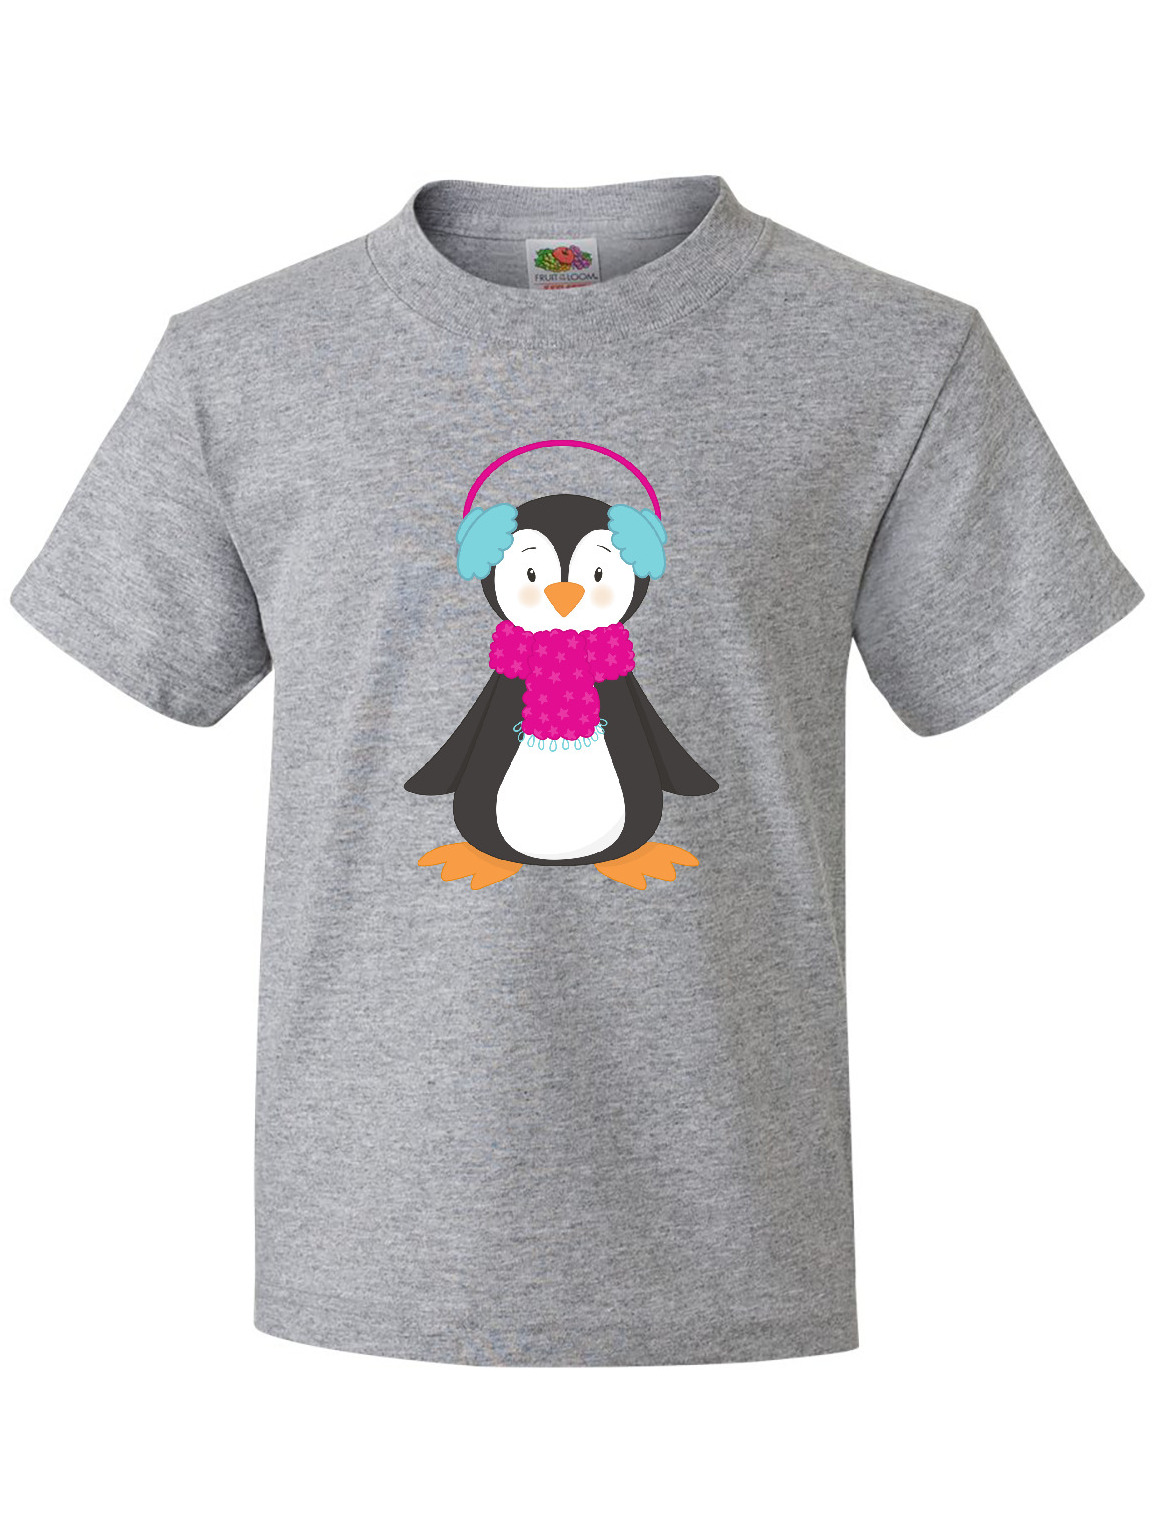 Inktastic Cute Penguin, Penguin With Ear Warmers, Scarf Youth T-Shirt - image 1 of 4